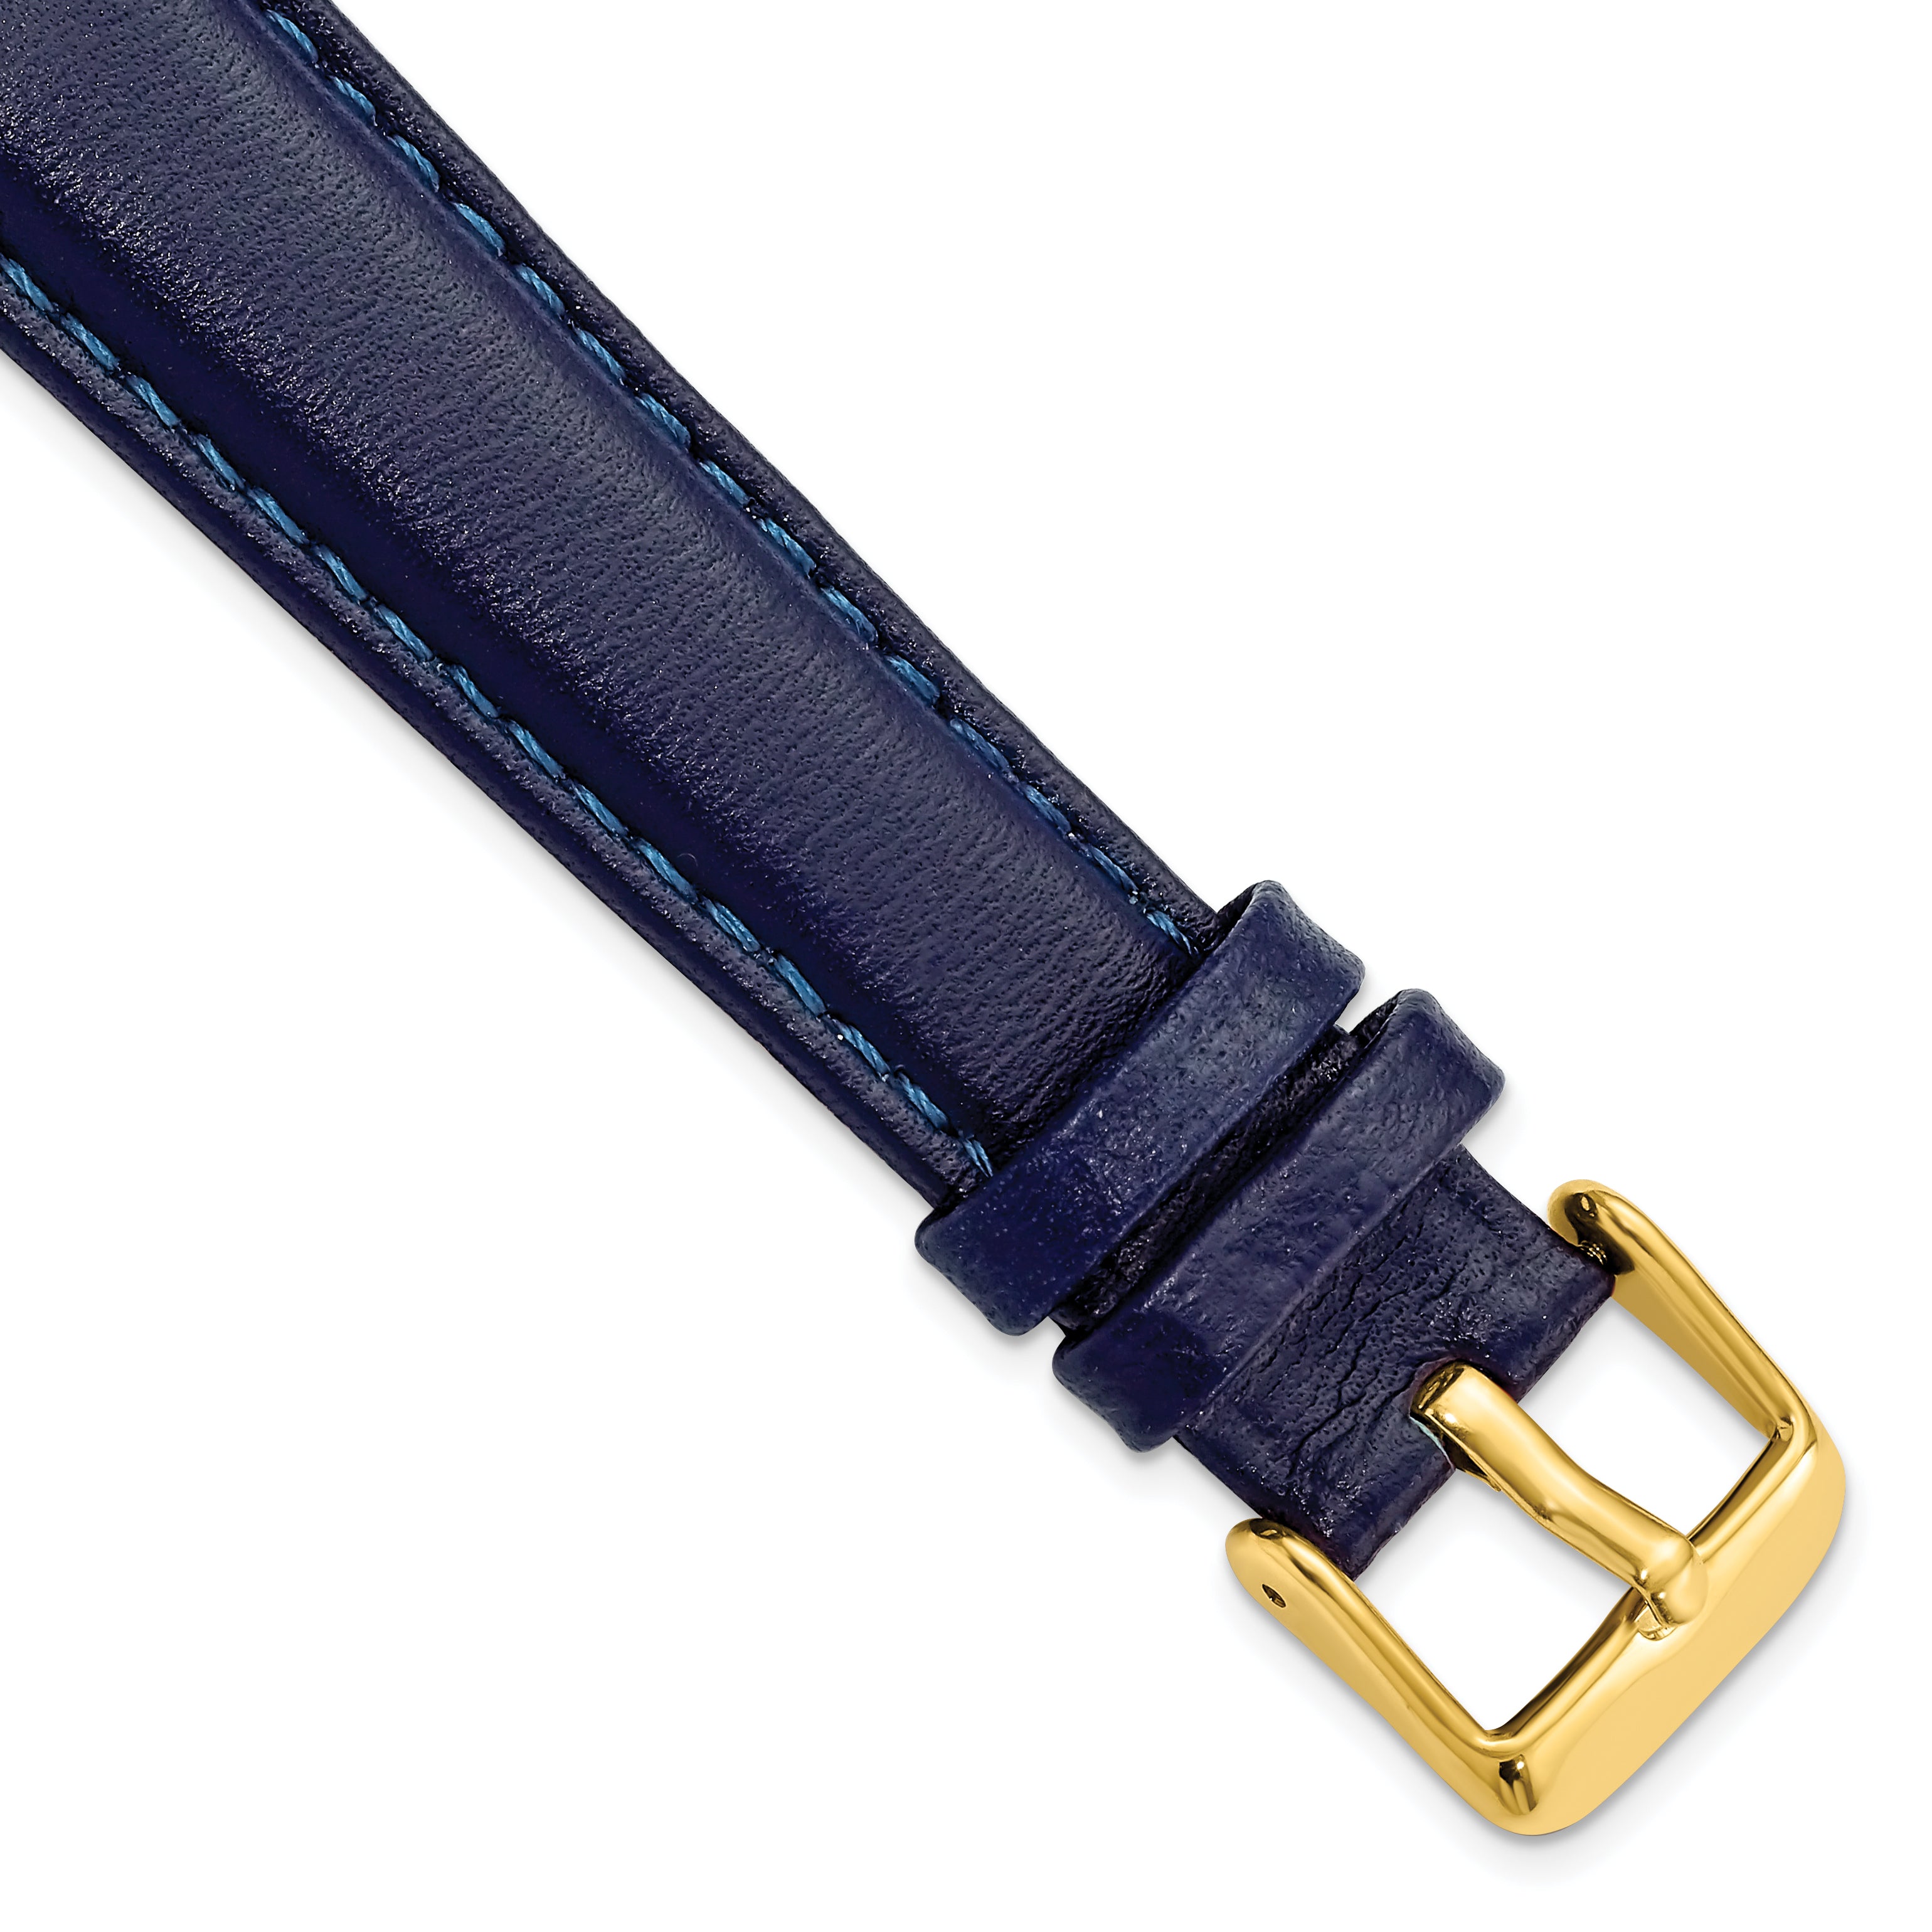 DeBeer 19mm Navy Glove Leather with Gold-tone Panerai Style Buckle 7.75 inch Watch Band